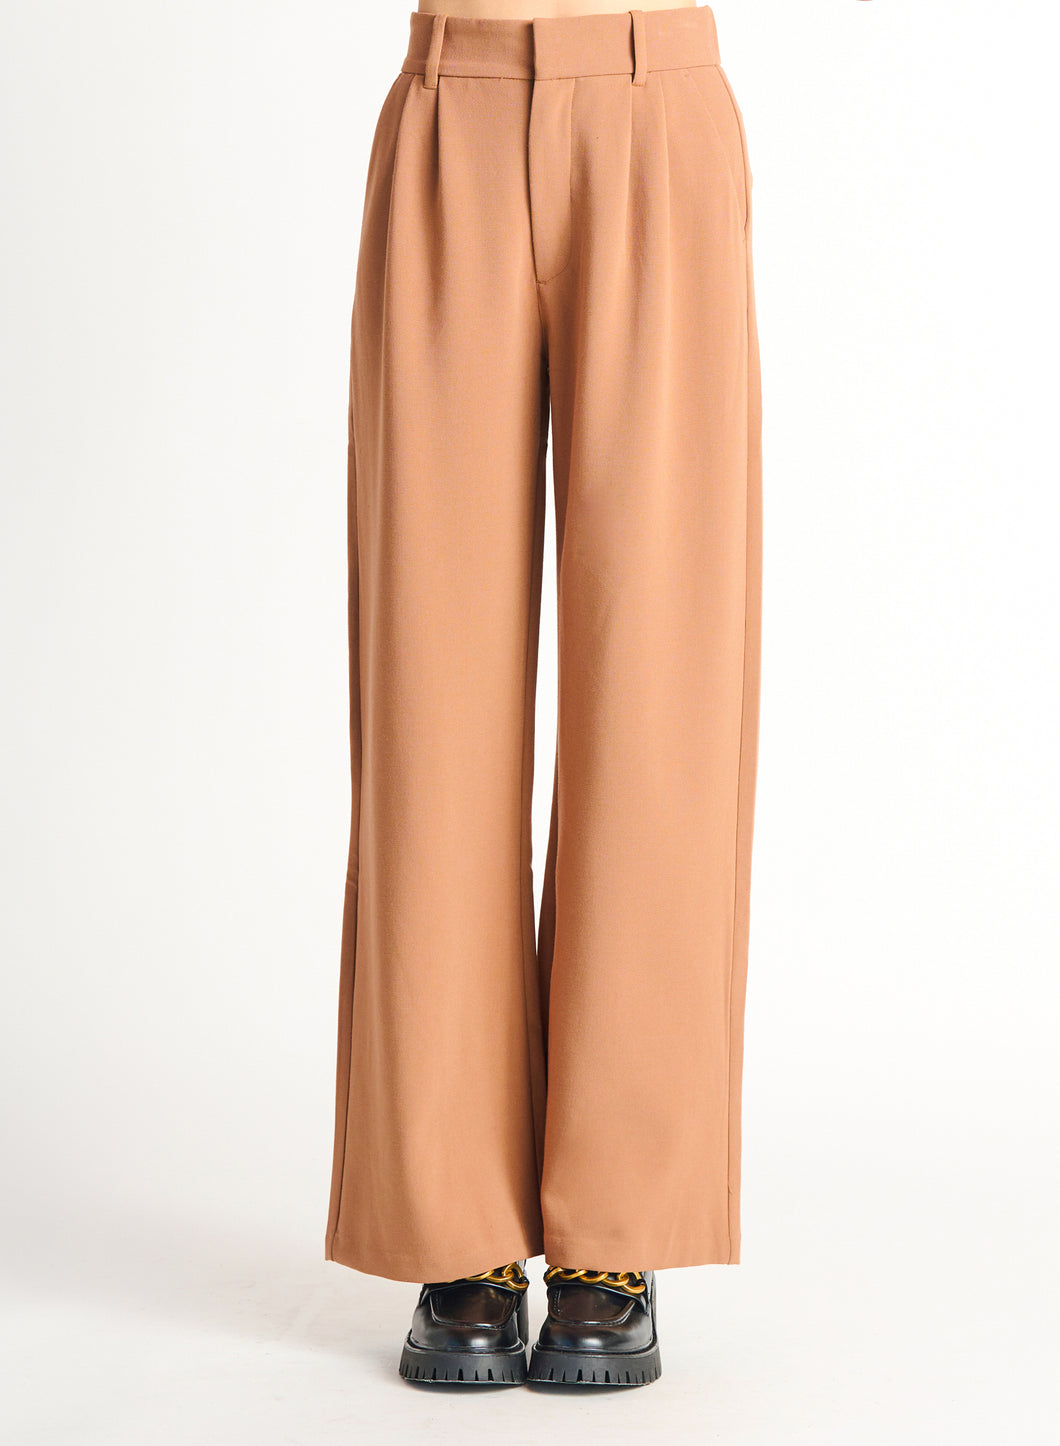 WIDE LEG TROUSER by Dex (available in plus sizes)